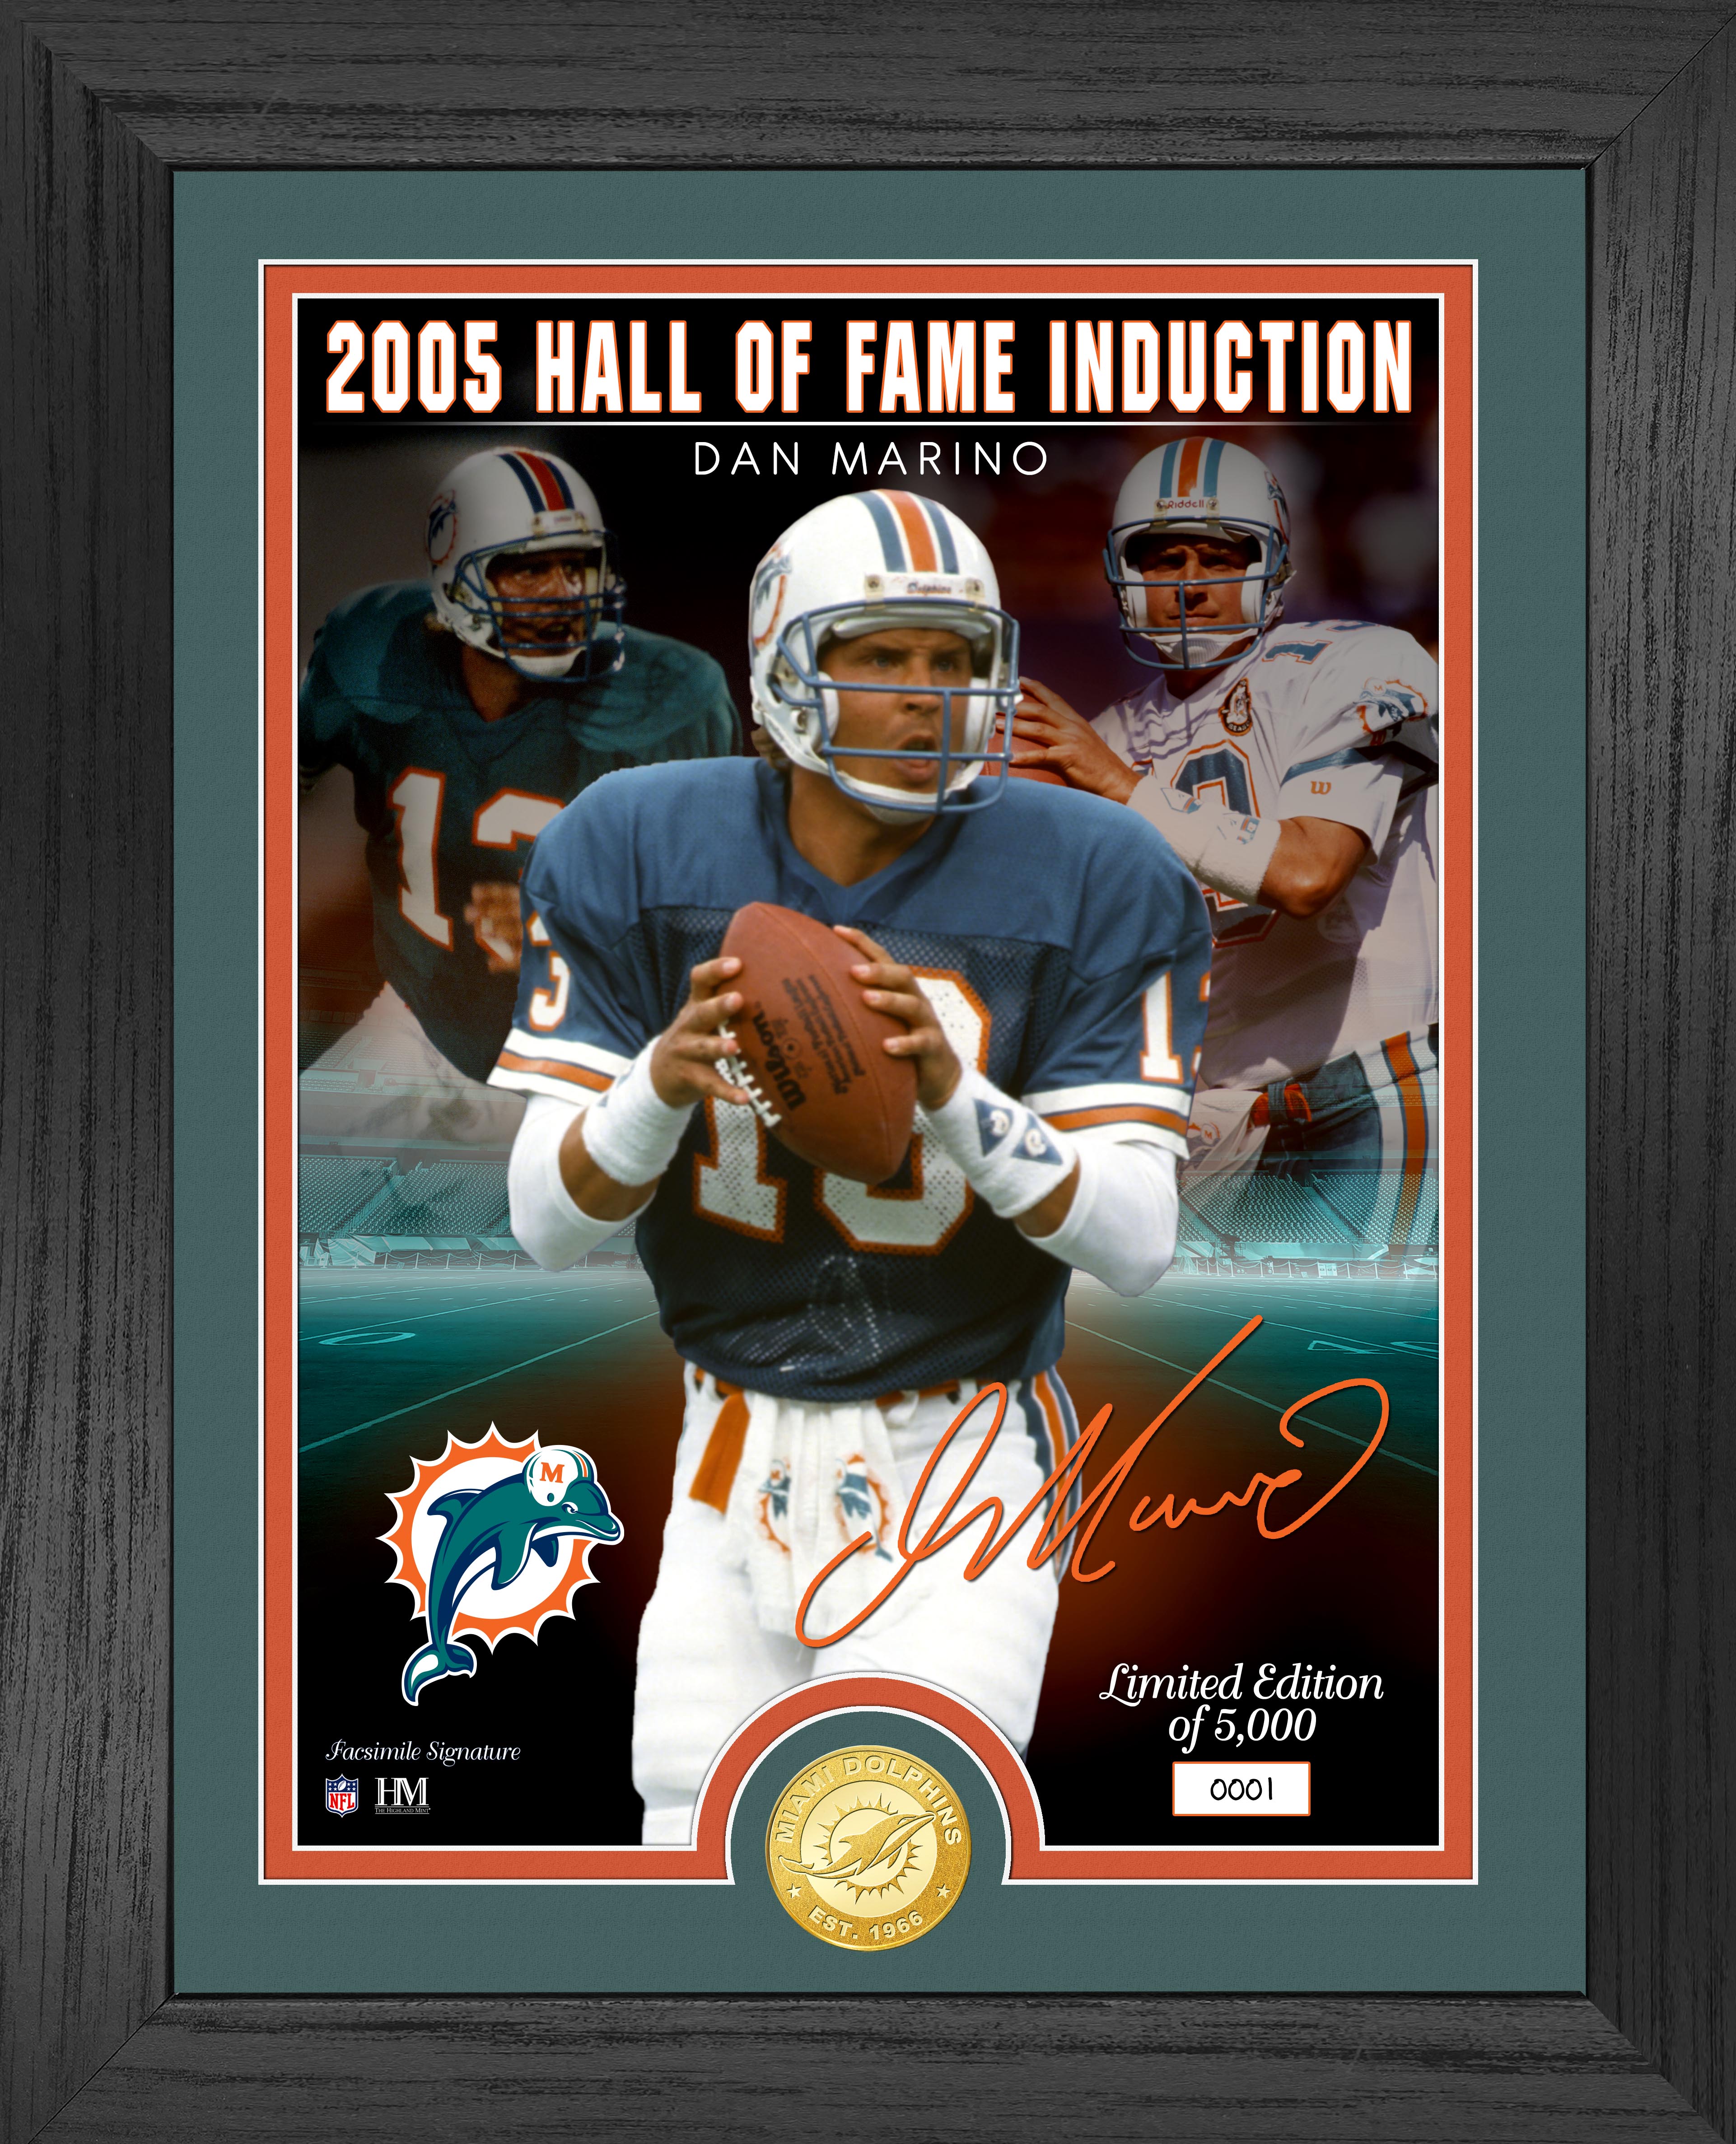 Dan Marino Dolphins Hall of Fame Induction Bronze Coin Signature Photo Mint